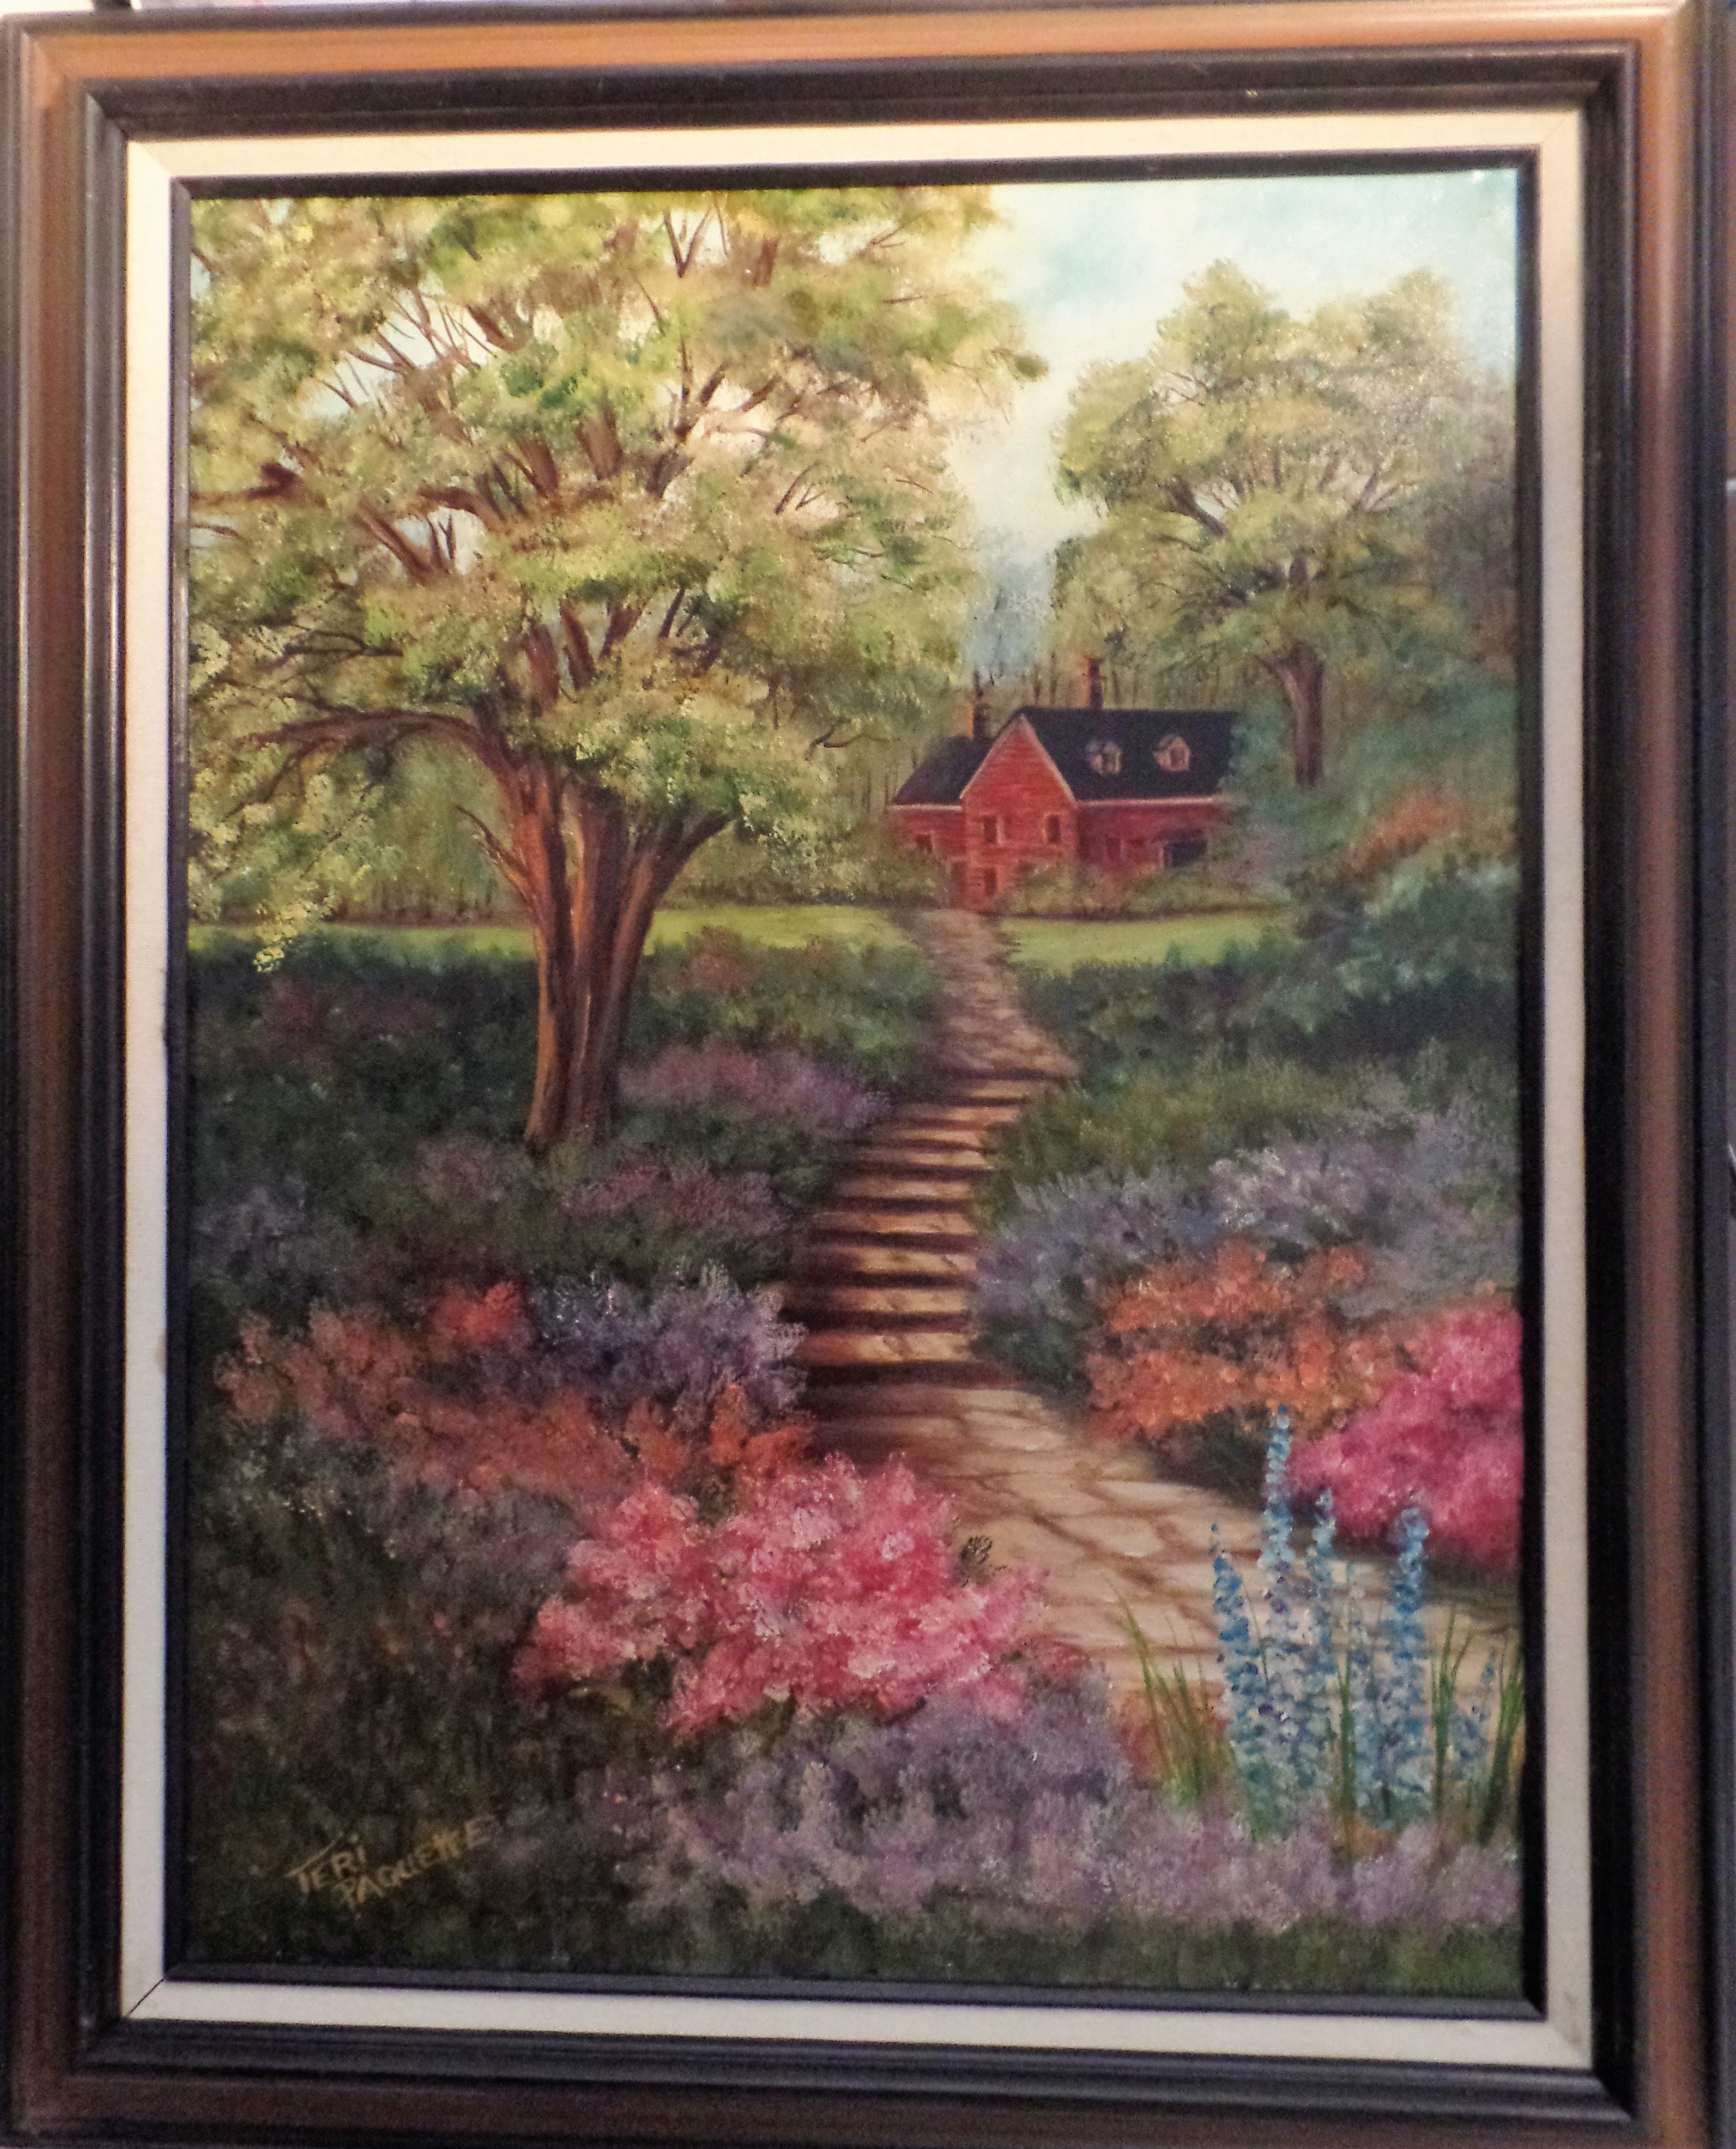 Teri Paquette; Home Garden, 2020, Original Painting Oil, 23 x 28 inches. Artwork description: 241 ORIGINAL OIL FEATURES A PATH TO HOME WITH FLOWERS- TREES- HOME IN BACKGROUND- SIGNED- FRAMED- - VARNISHED...